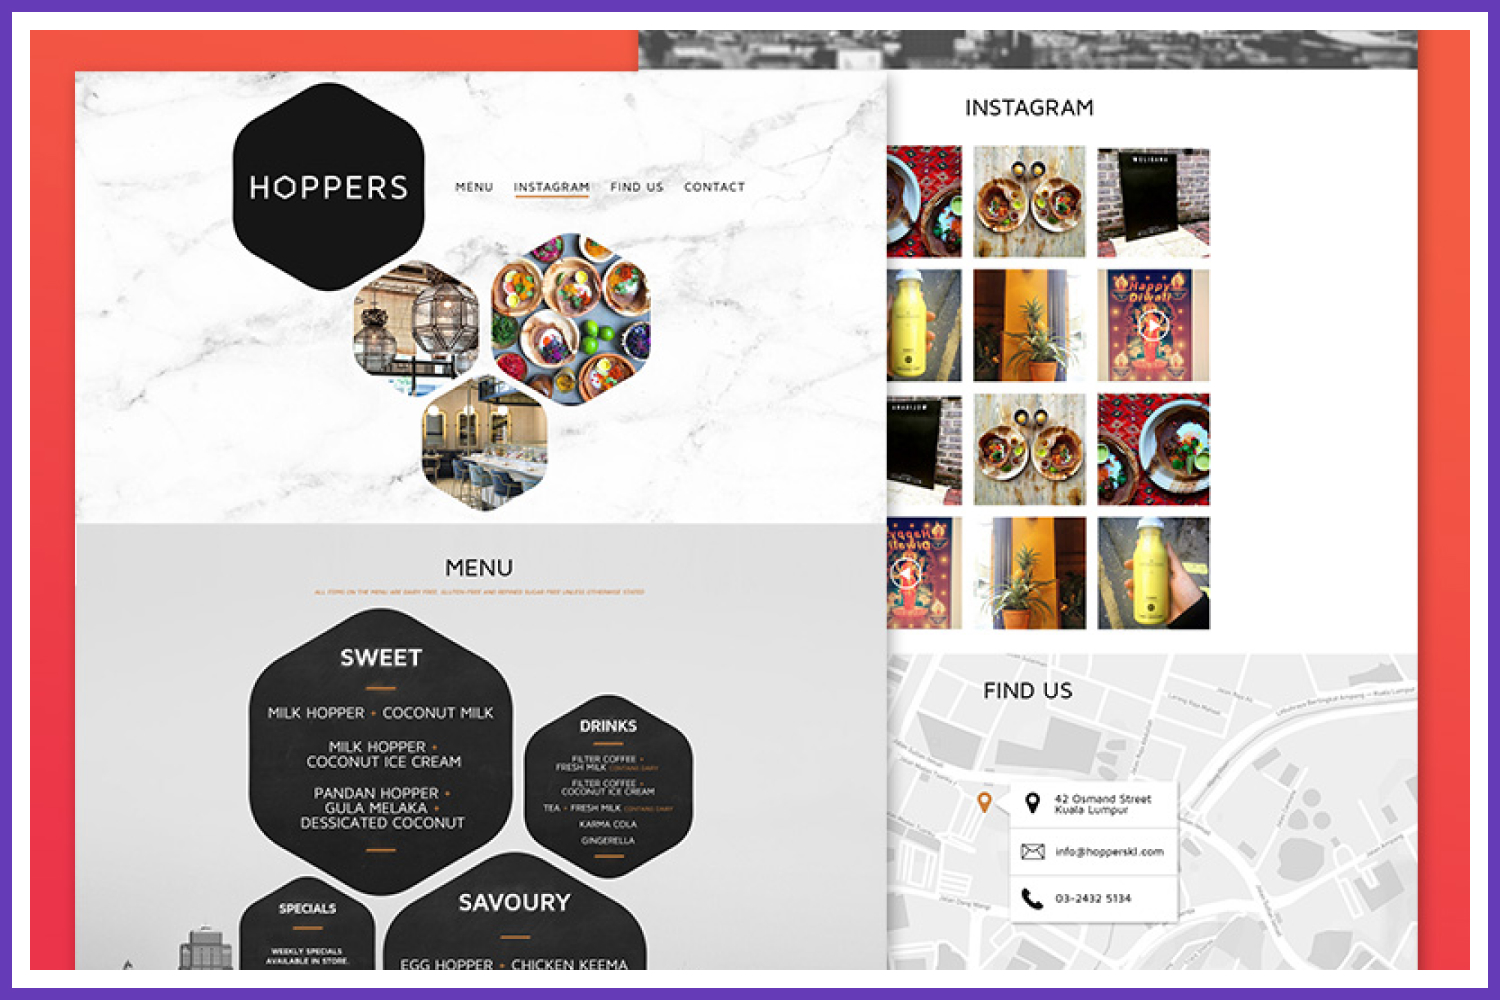 The hoppers project on dribbble.